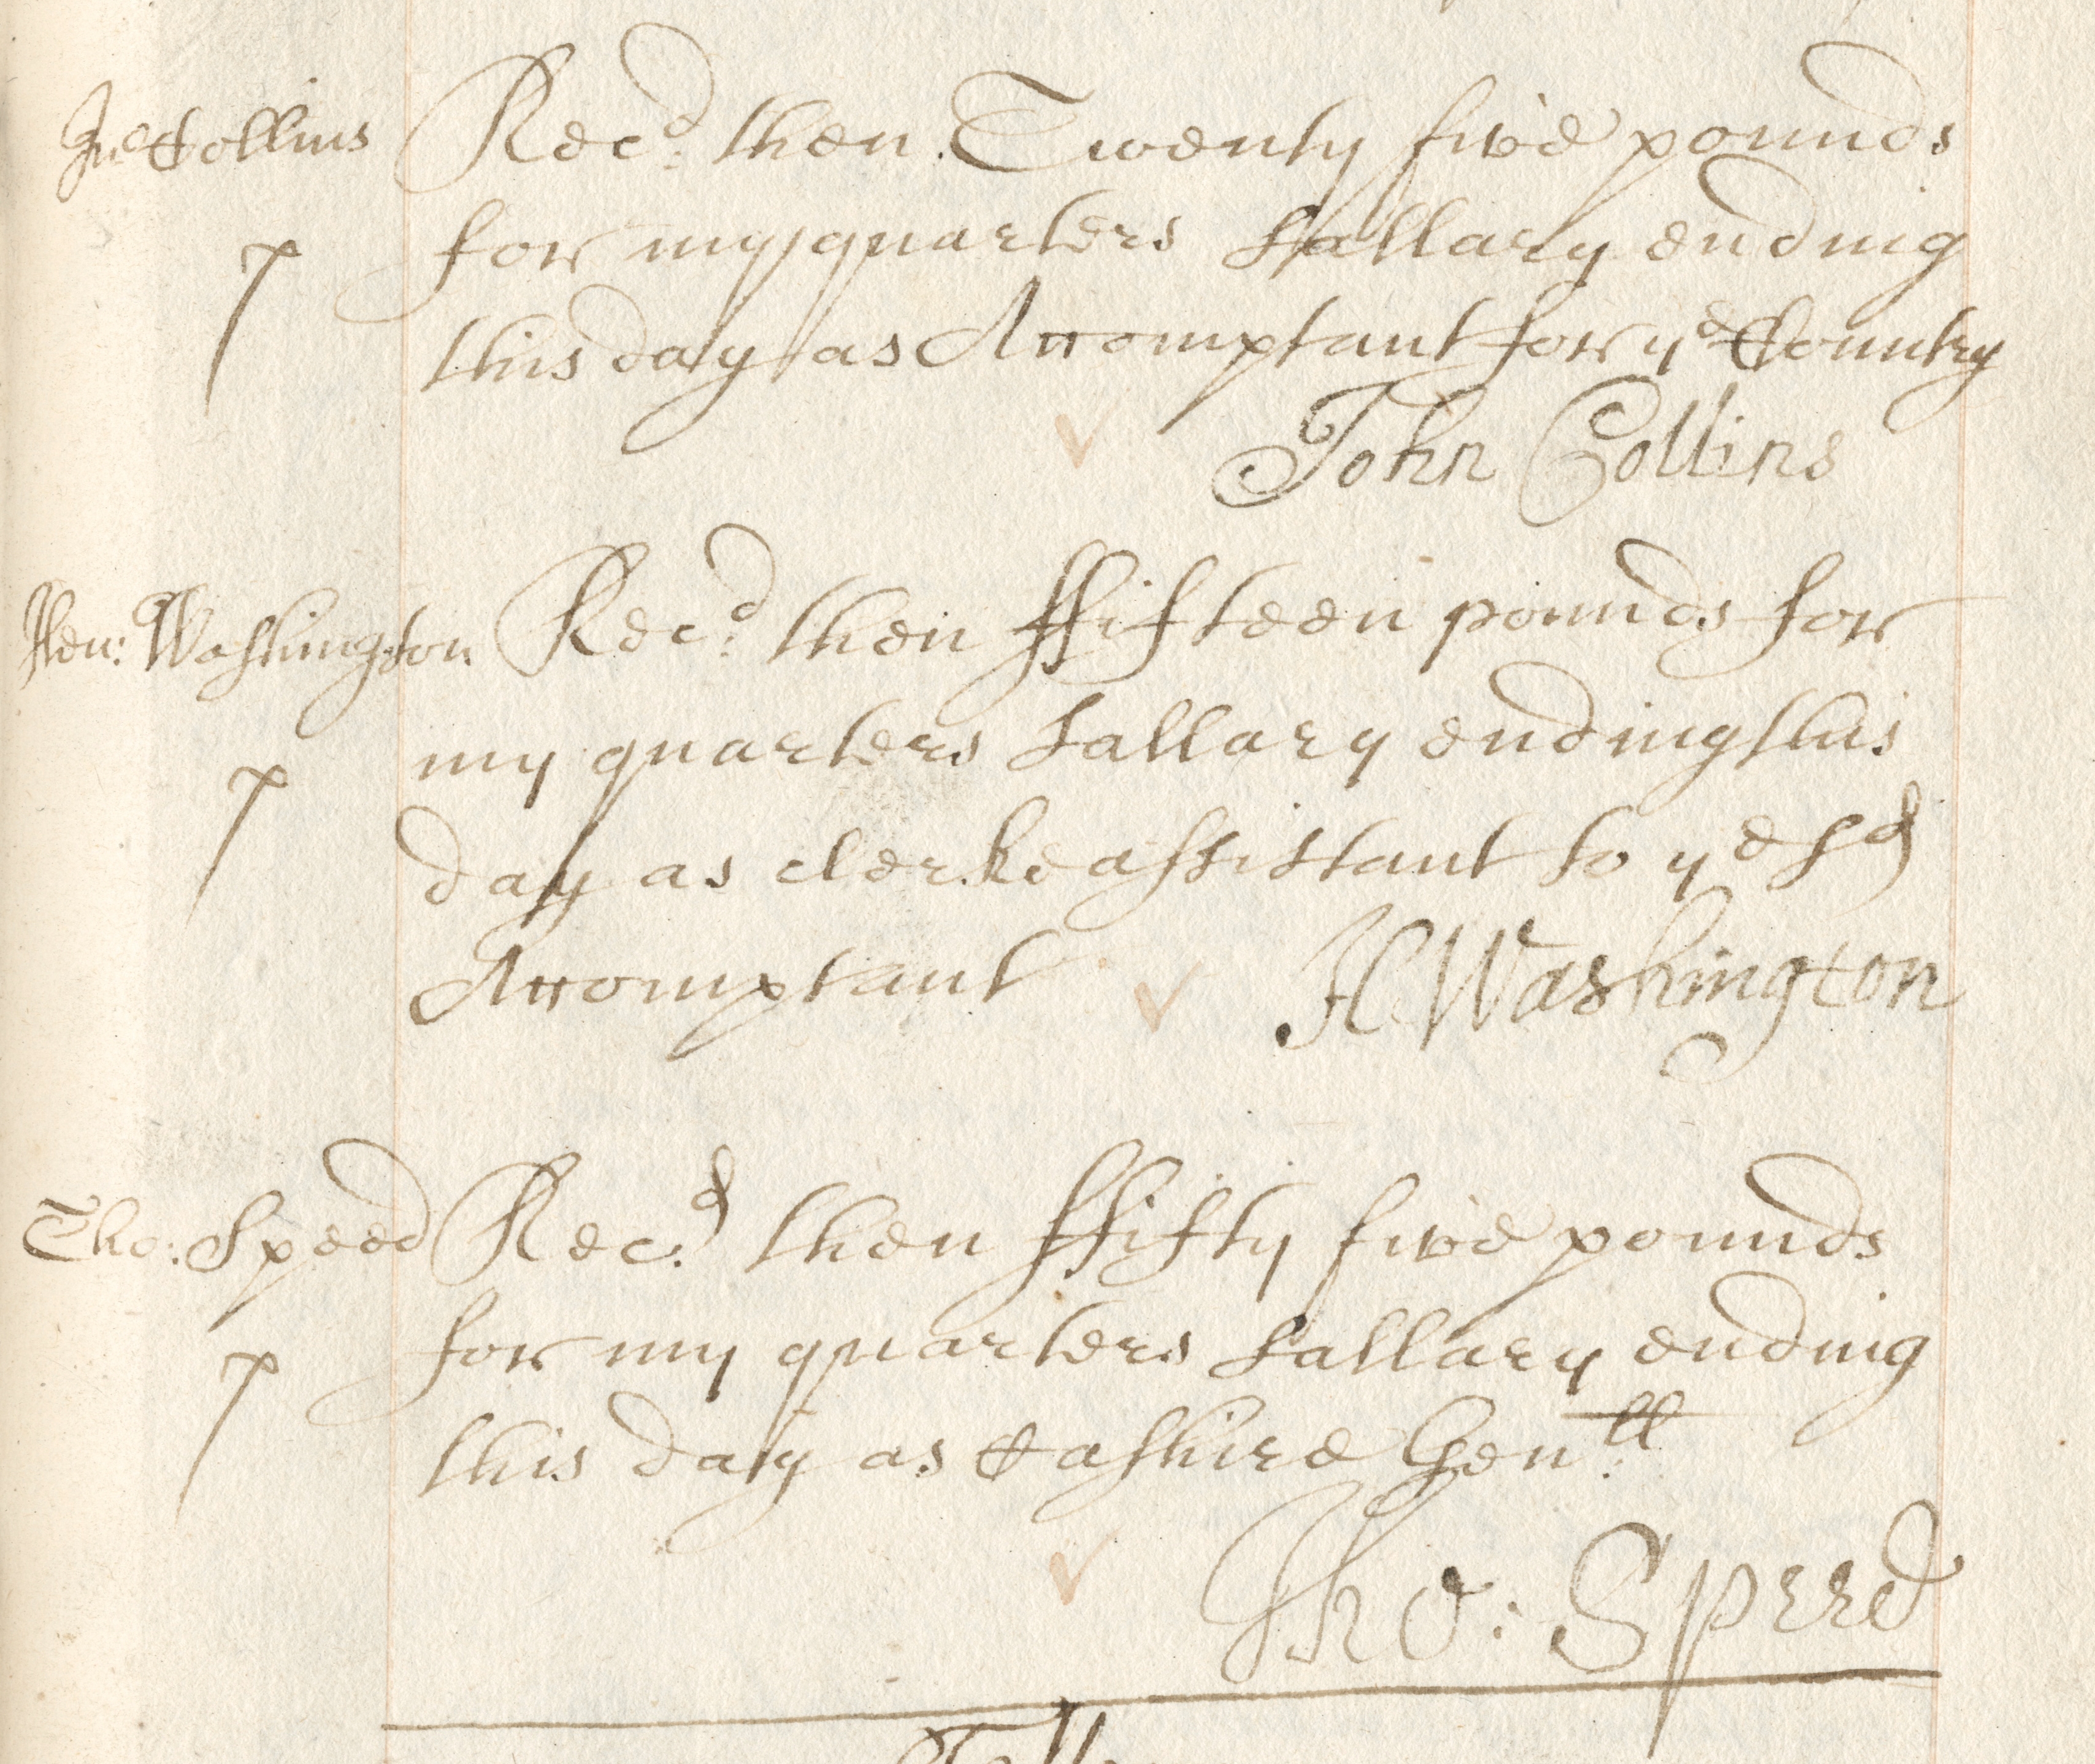 BANKING AND GOVERNMENT – EDWARD BACKWELL Banking ledger kept in person by Edward Backwell, Excise... - Image 4 of 7